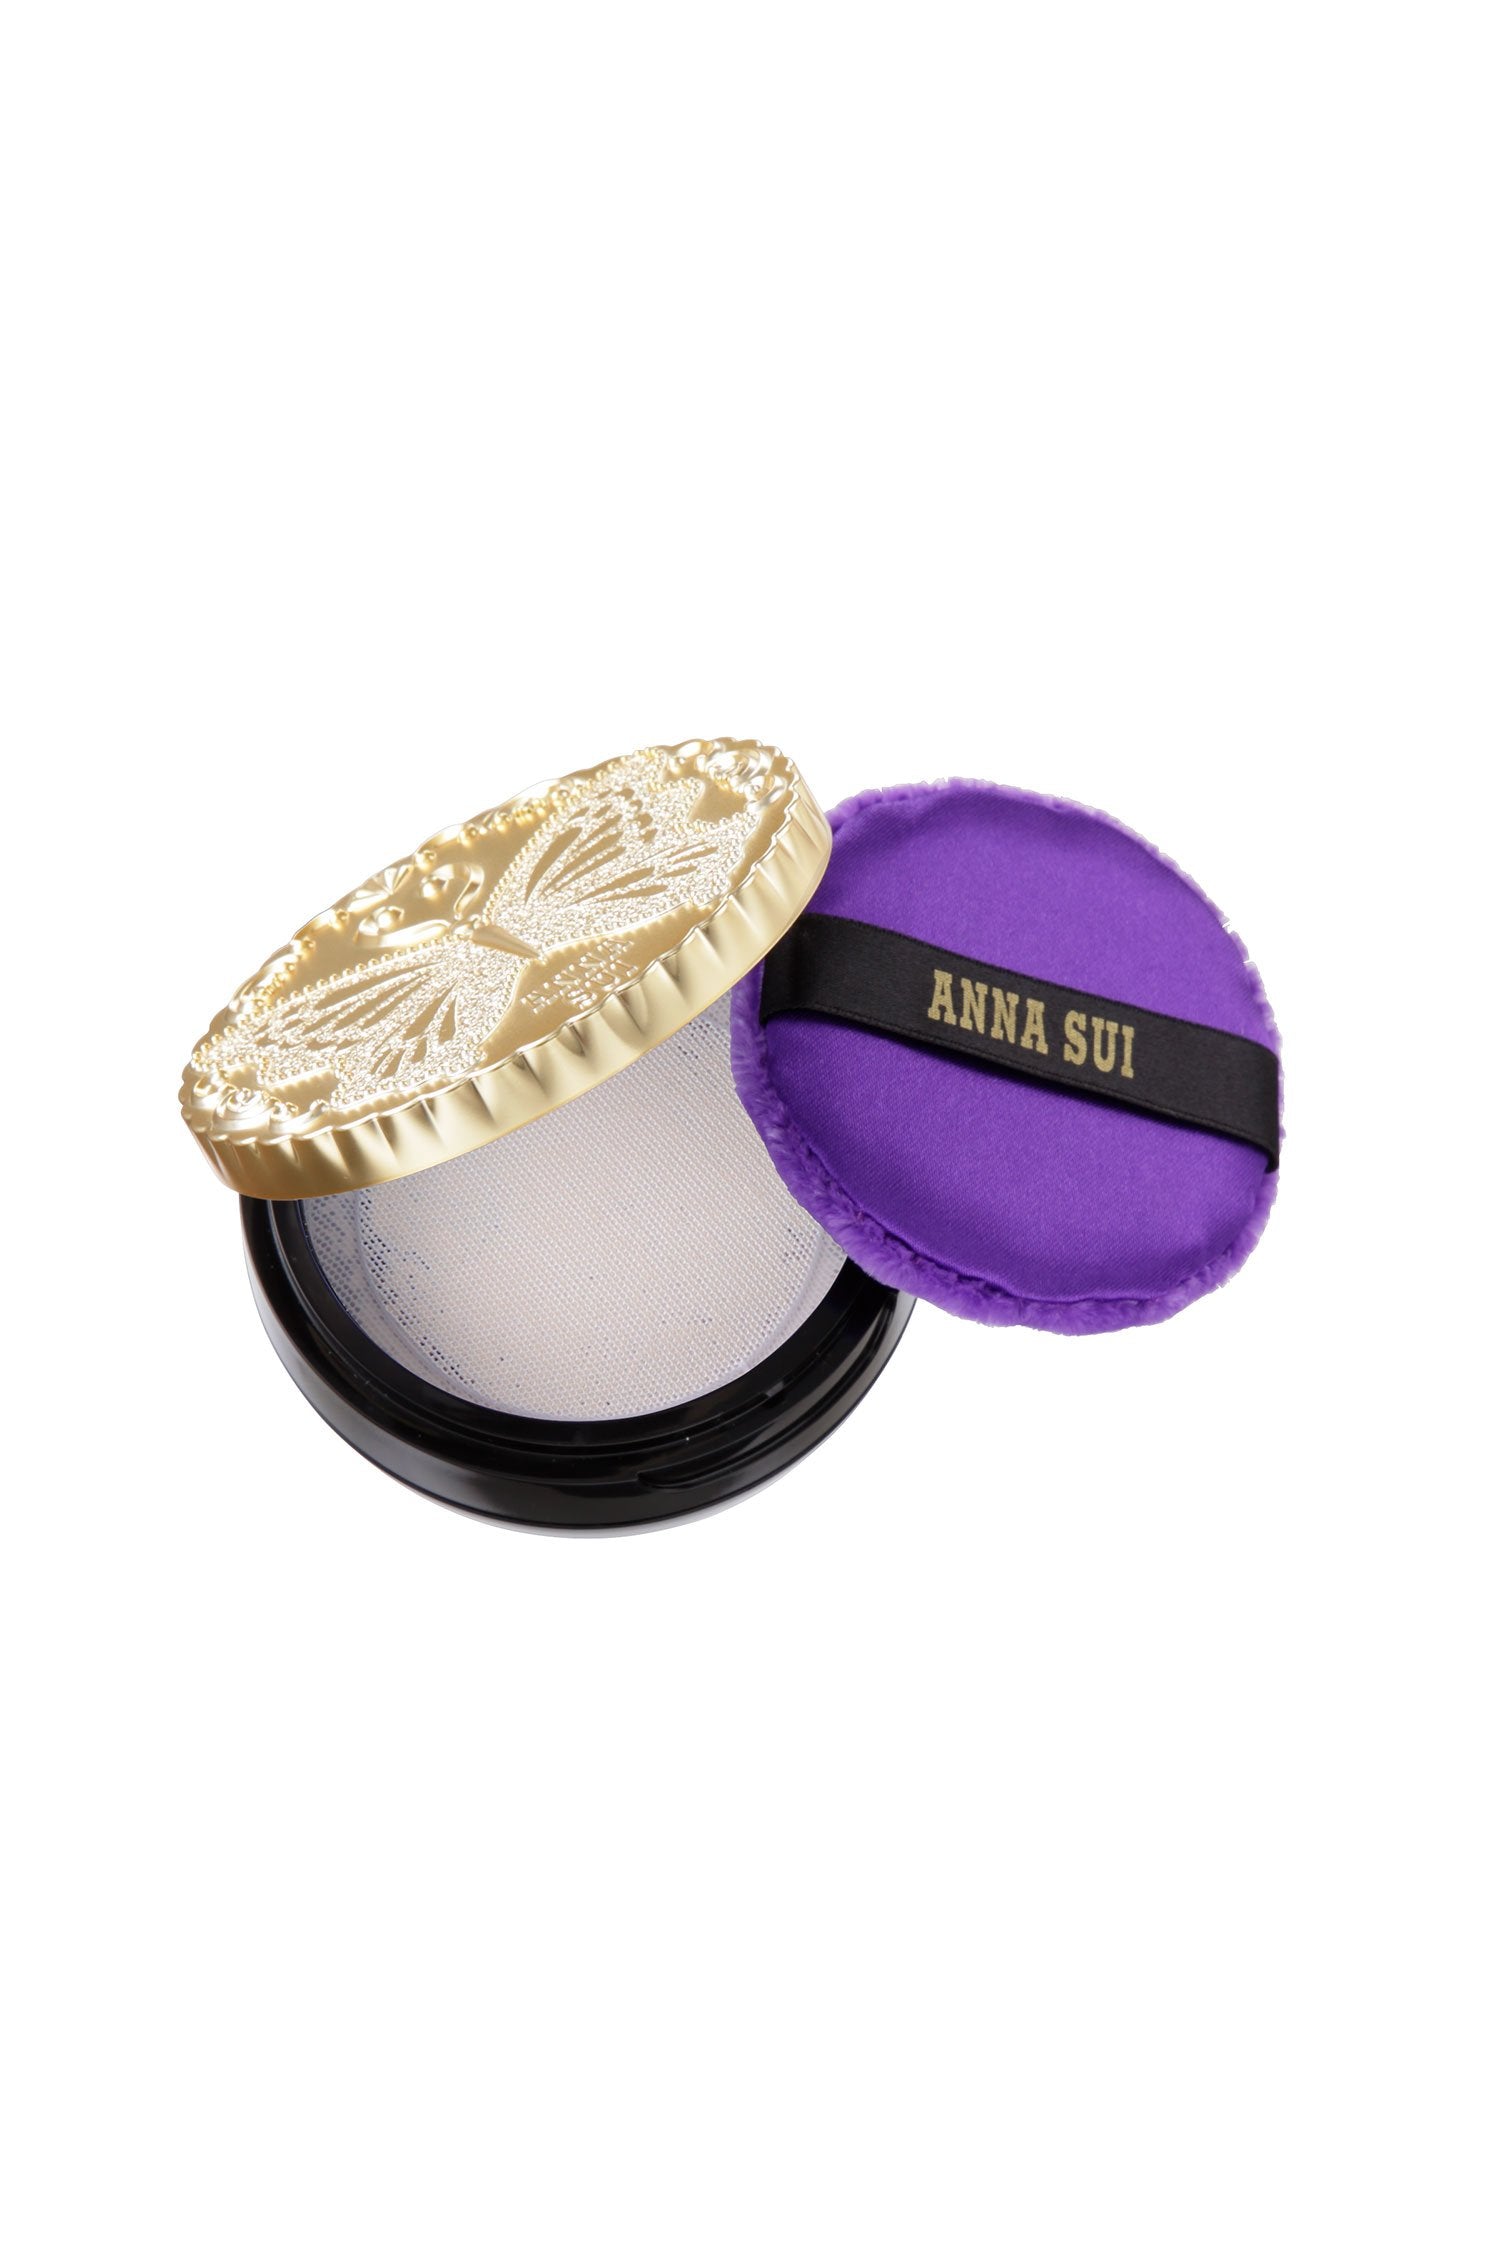 Mini Loose LIGHT BEIGE Powder Set, round black case, with a golden lid with engraved butterfly on top, and a purple pad.